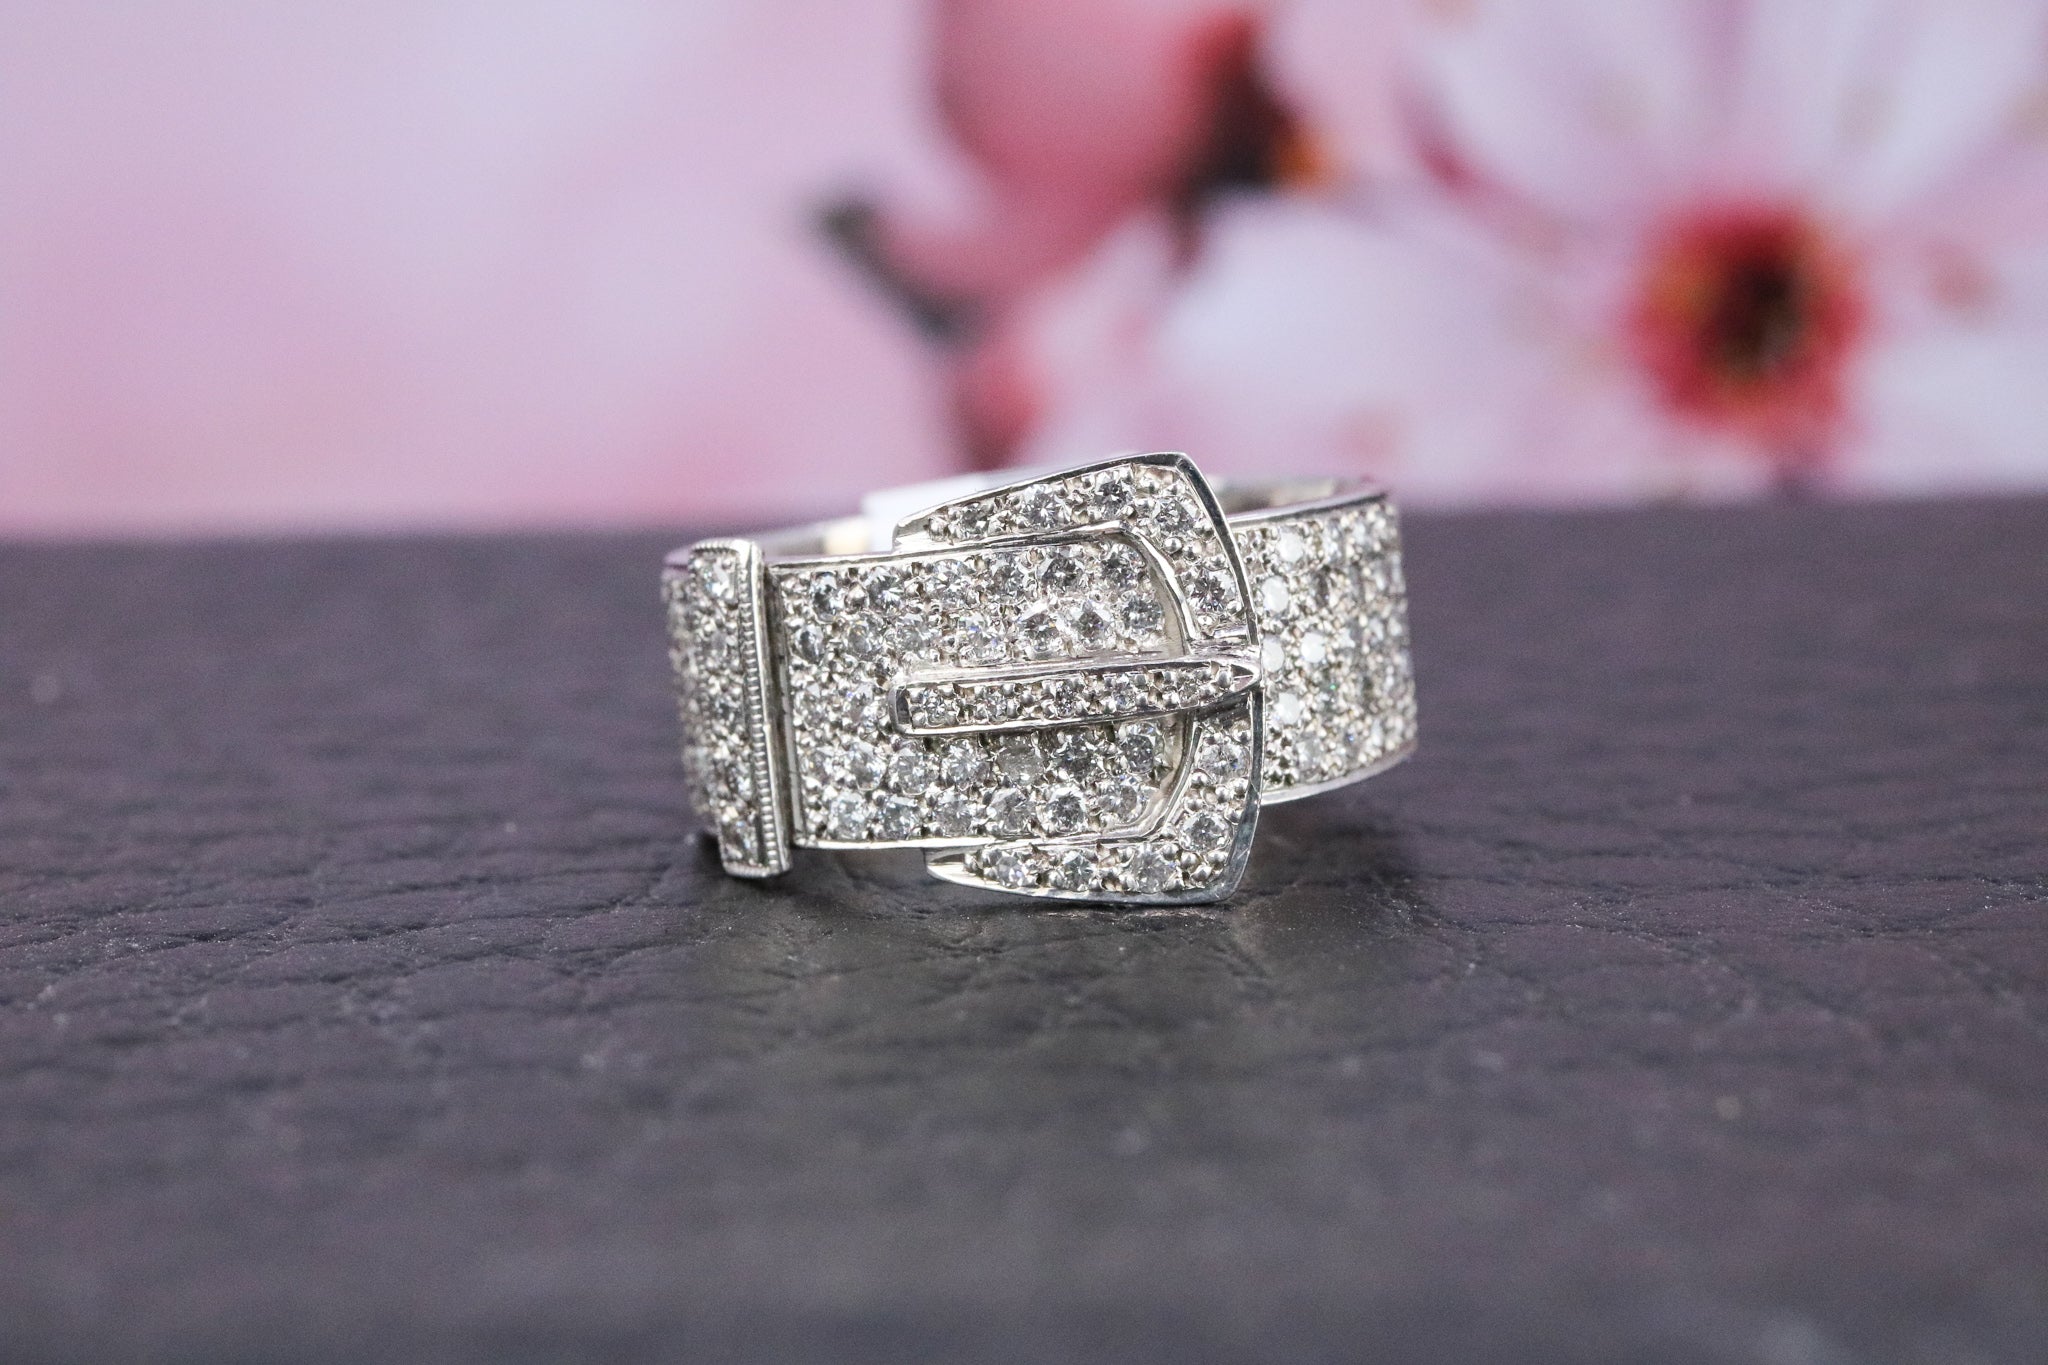 18ct White Gold Diamond Ring - HJ2418 - Hallmark Jewellers Formby & The Jewellers Bench Widnes